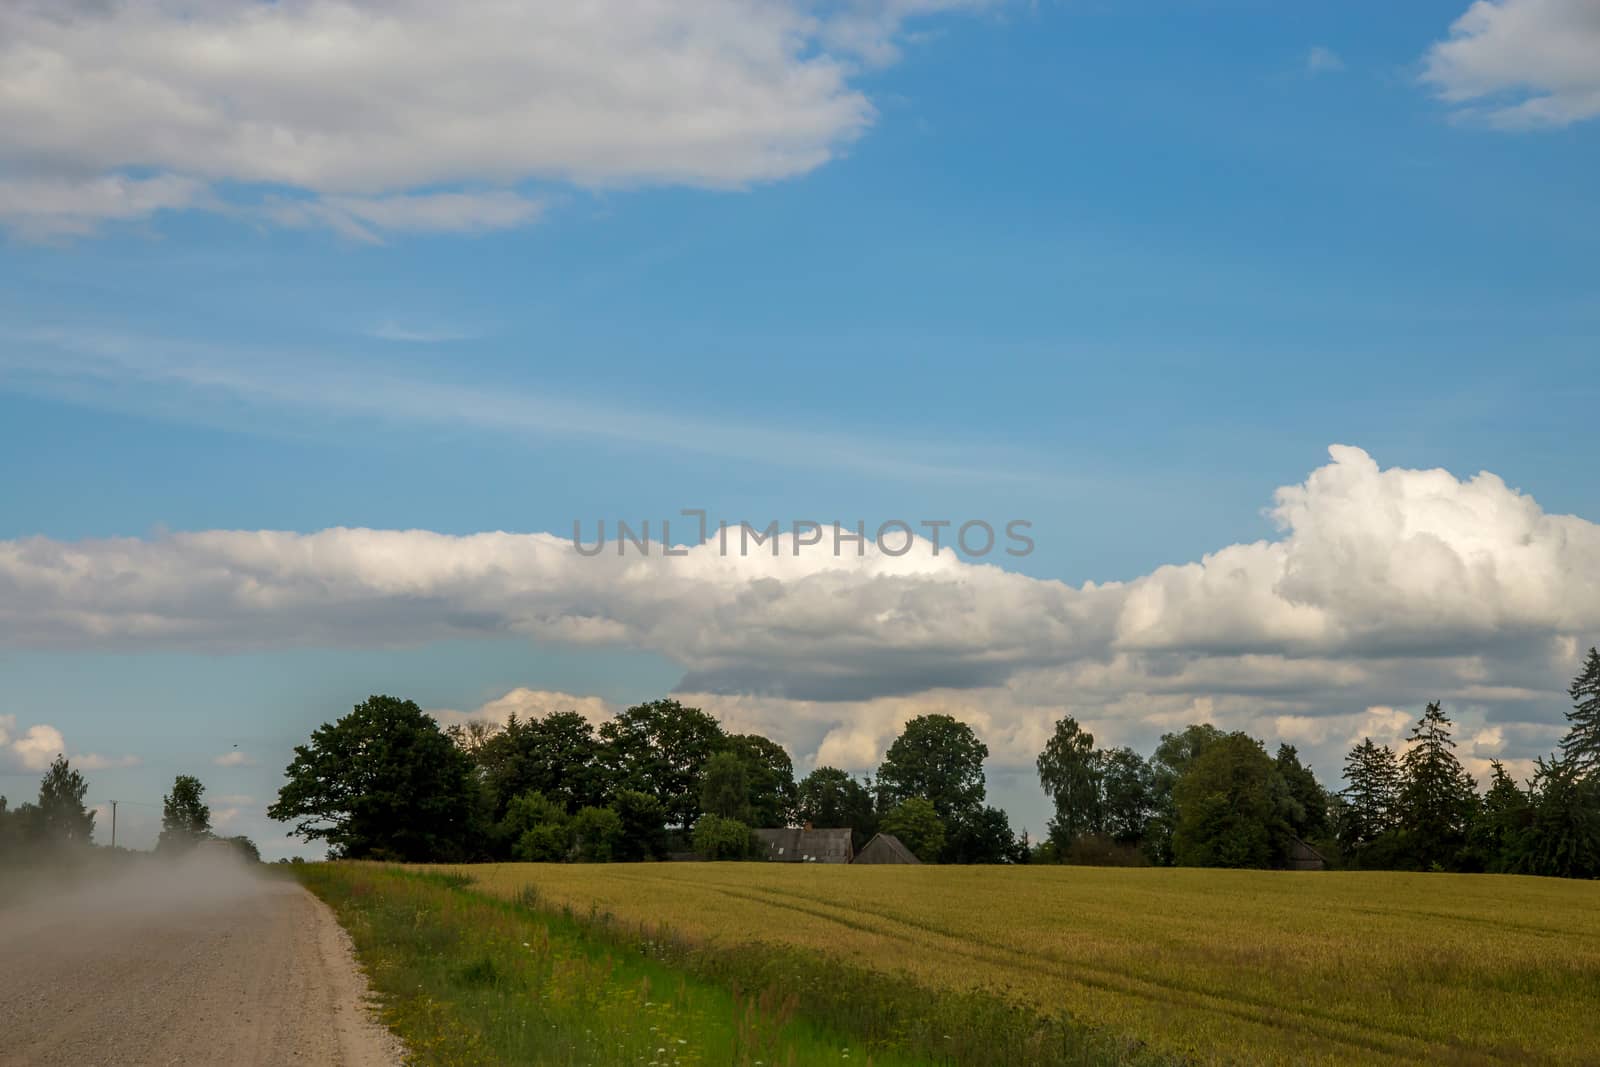 Summer landscape with empty road, trees and blue sky.. Rural road, cornfield, wood and cloudy blue sky. Classic rural landscape in Latvia.